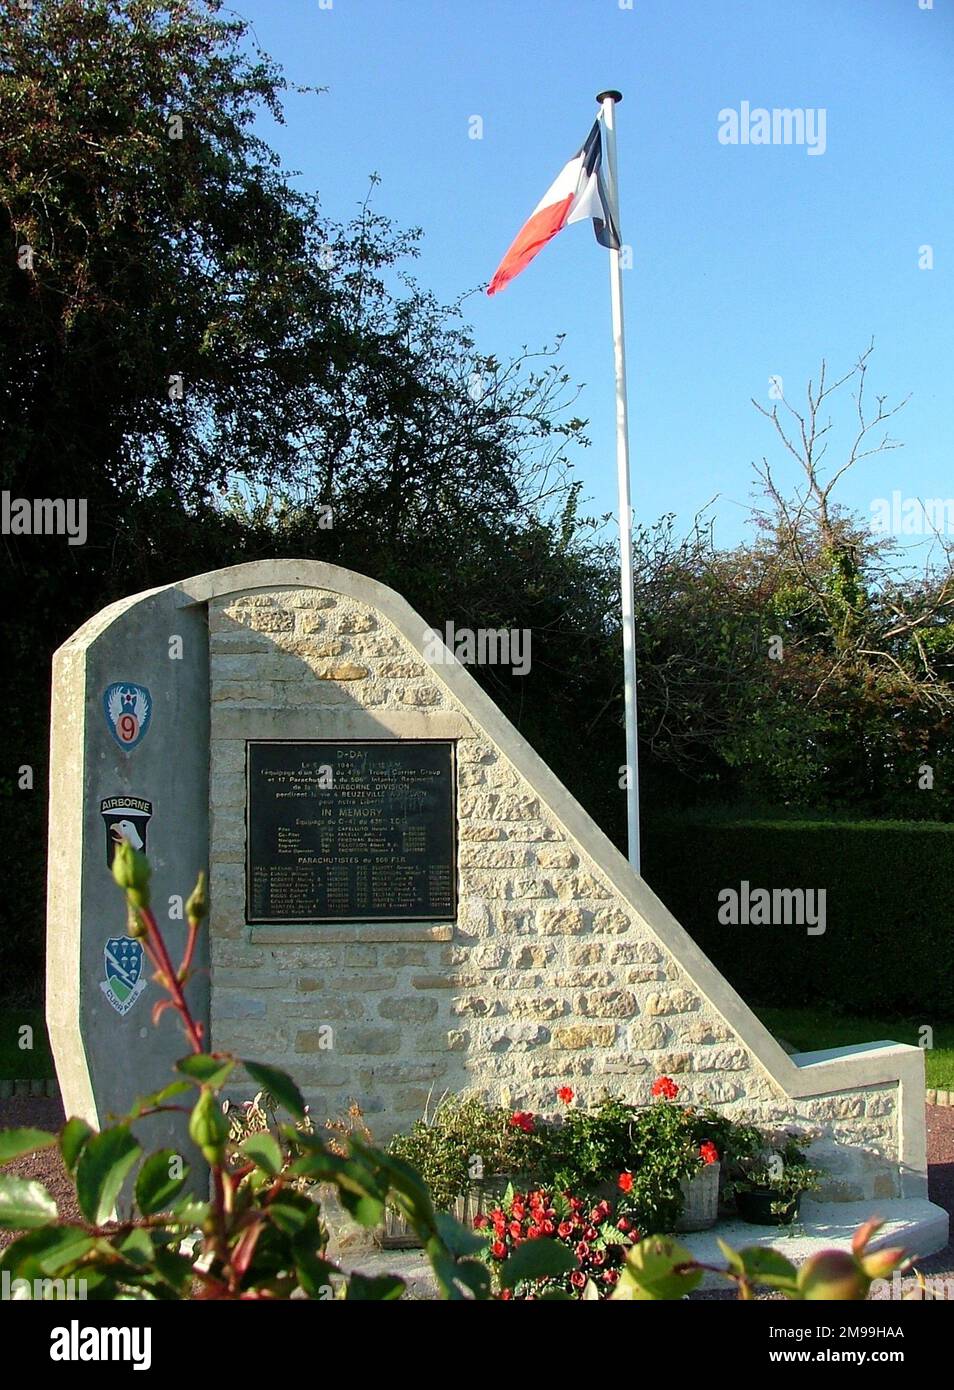 The C47, was No 66, and the lead plane of its formation.  In it was Lt T Meehan Commanding 'E'Company of 506 PIR. The story of Easy Company is told in Spielbergs 'Band of  Brothers'. Here everyone was killed. Seventeen named men of 'Easy' Company are named on the Memorial. Stock Photo